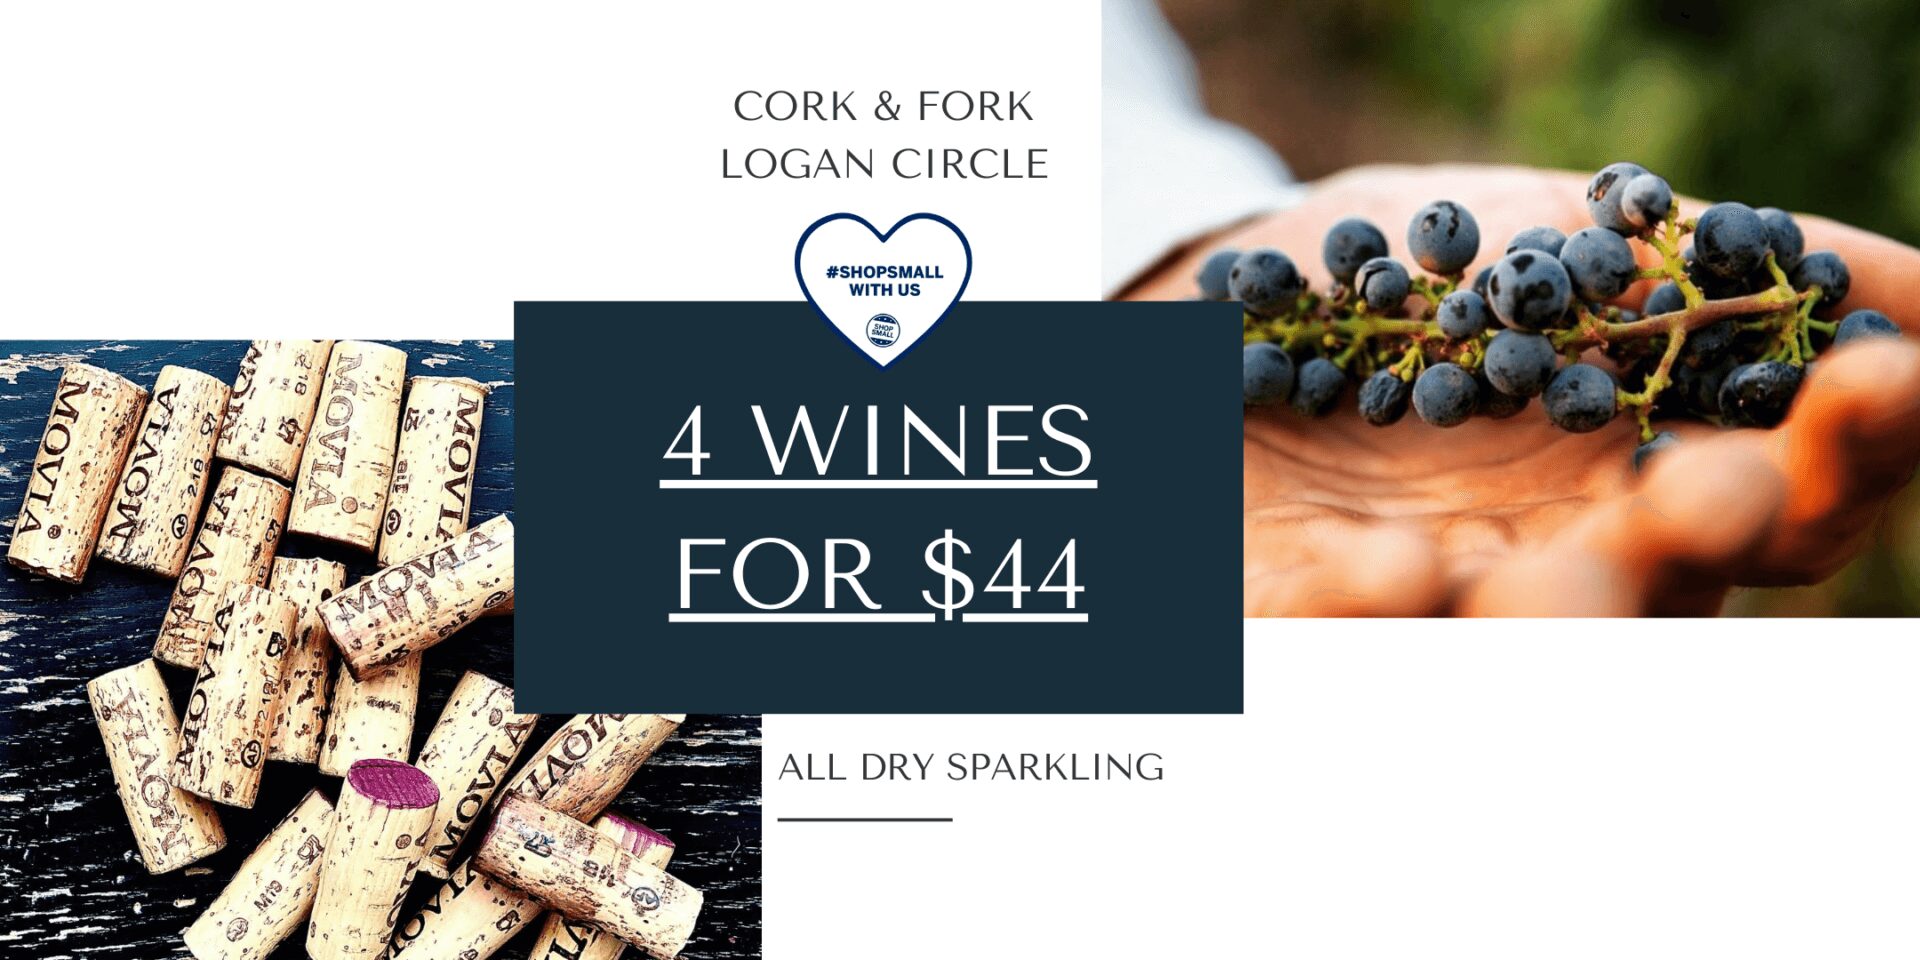 All Dry Sparkling wine deal